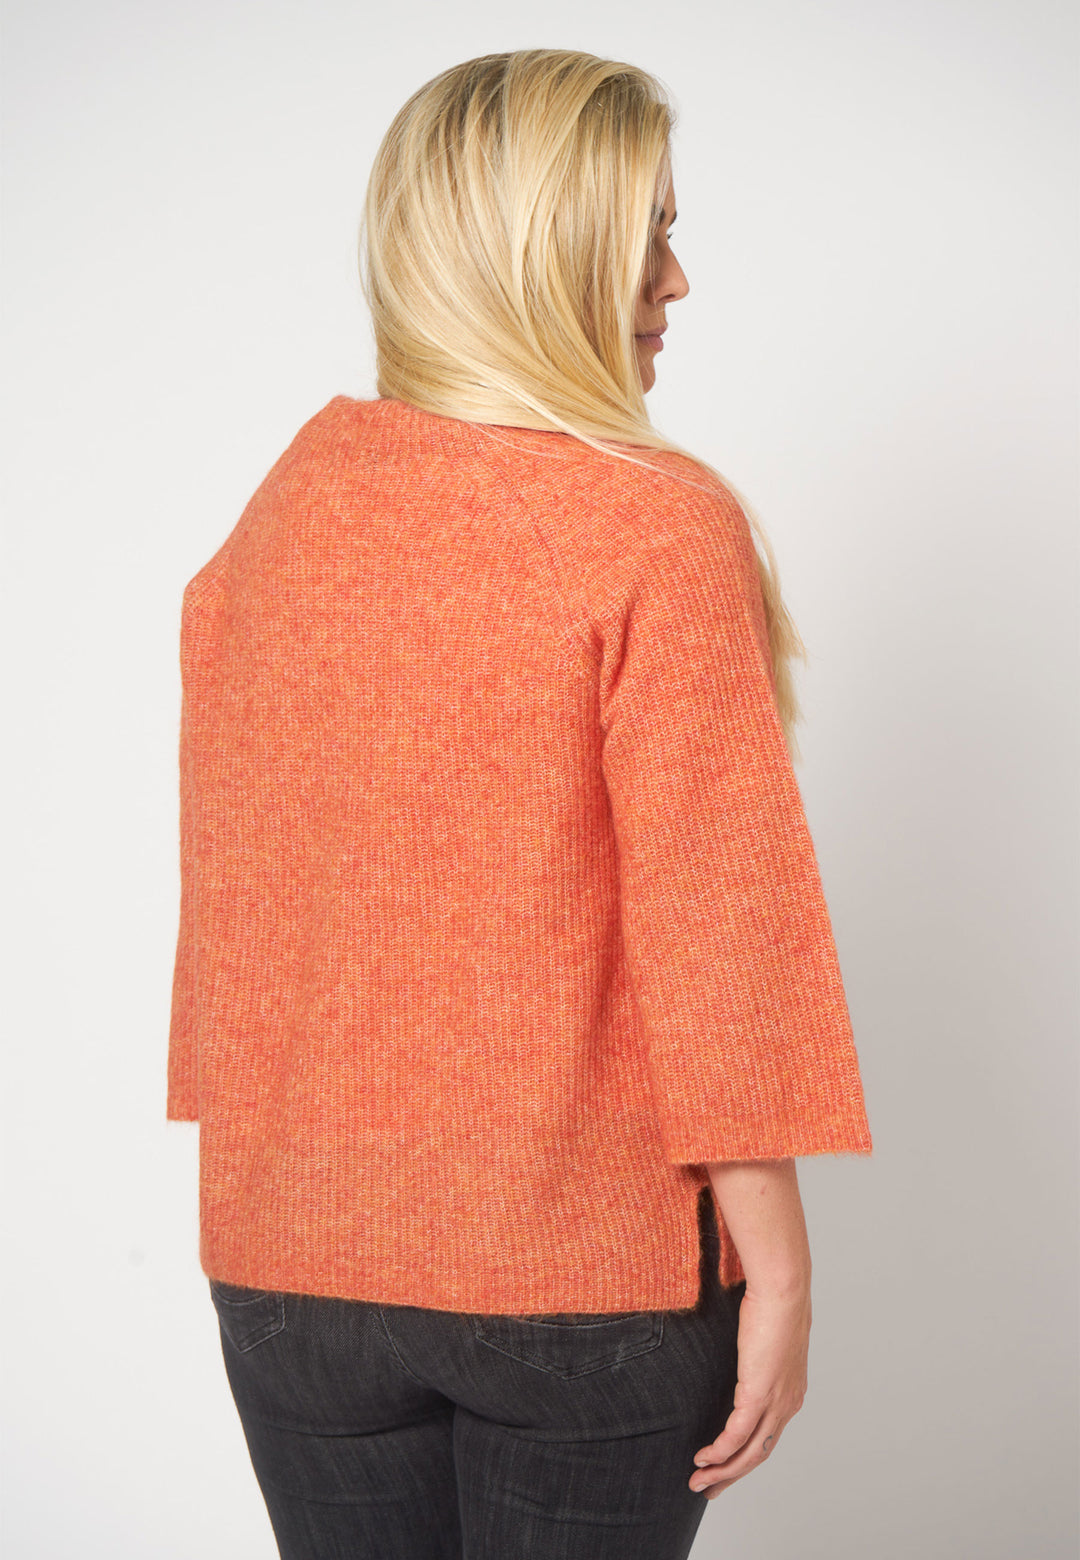 Lind Nelly Knit Pullover 1213 Orange